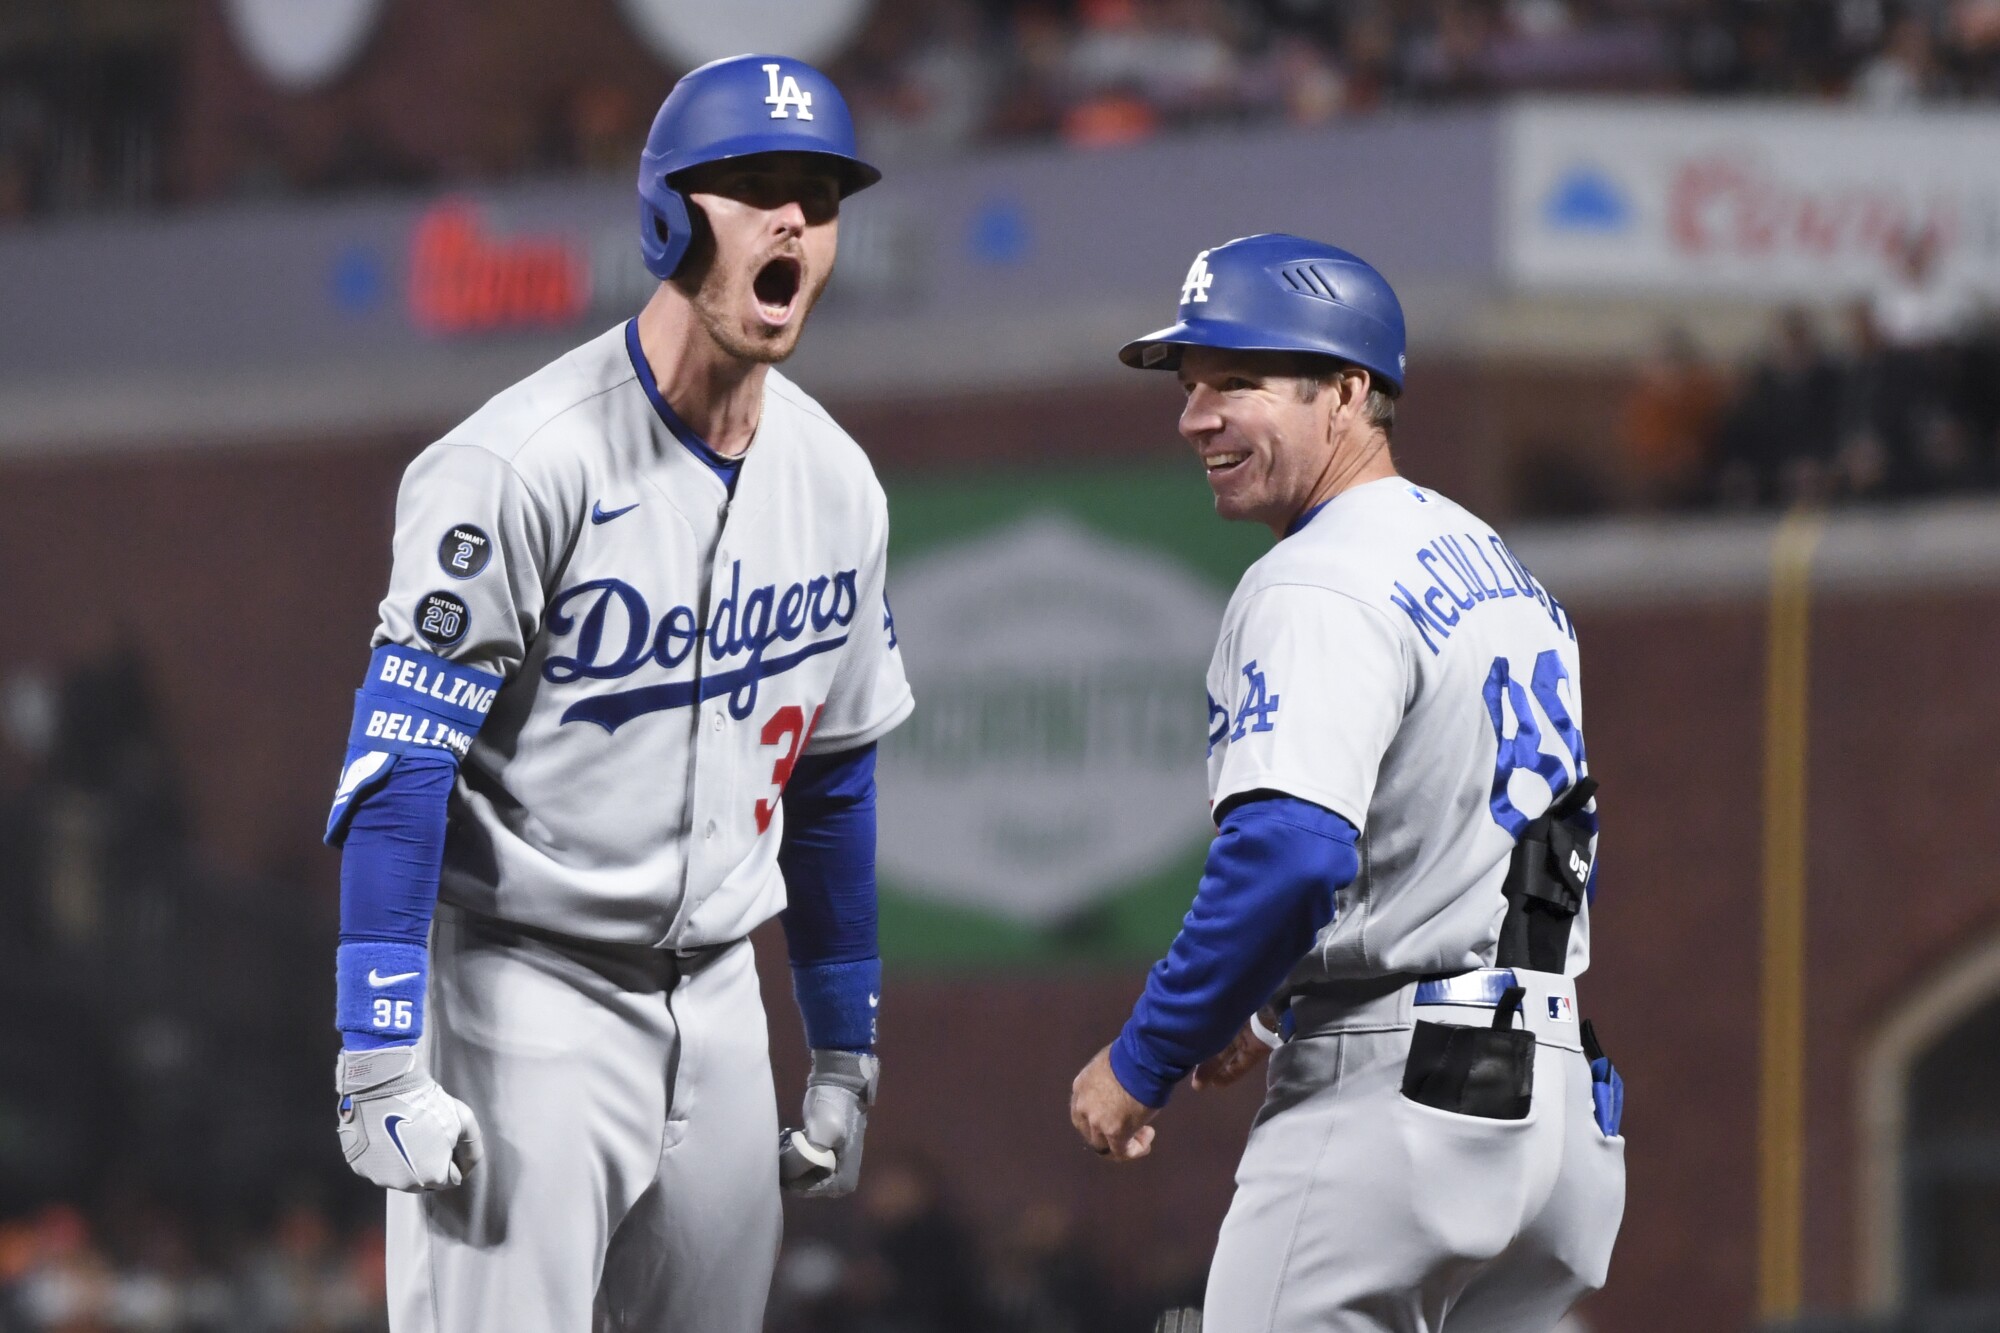 Cody Bellinger celebrates after hitting a run-scoring single as first base coach Clayton McCullough smiles.